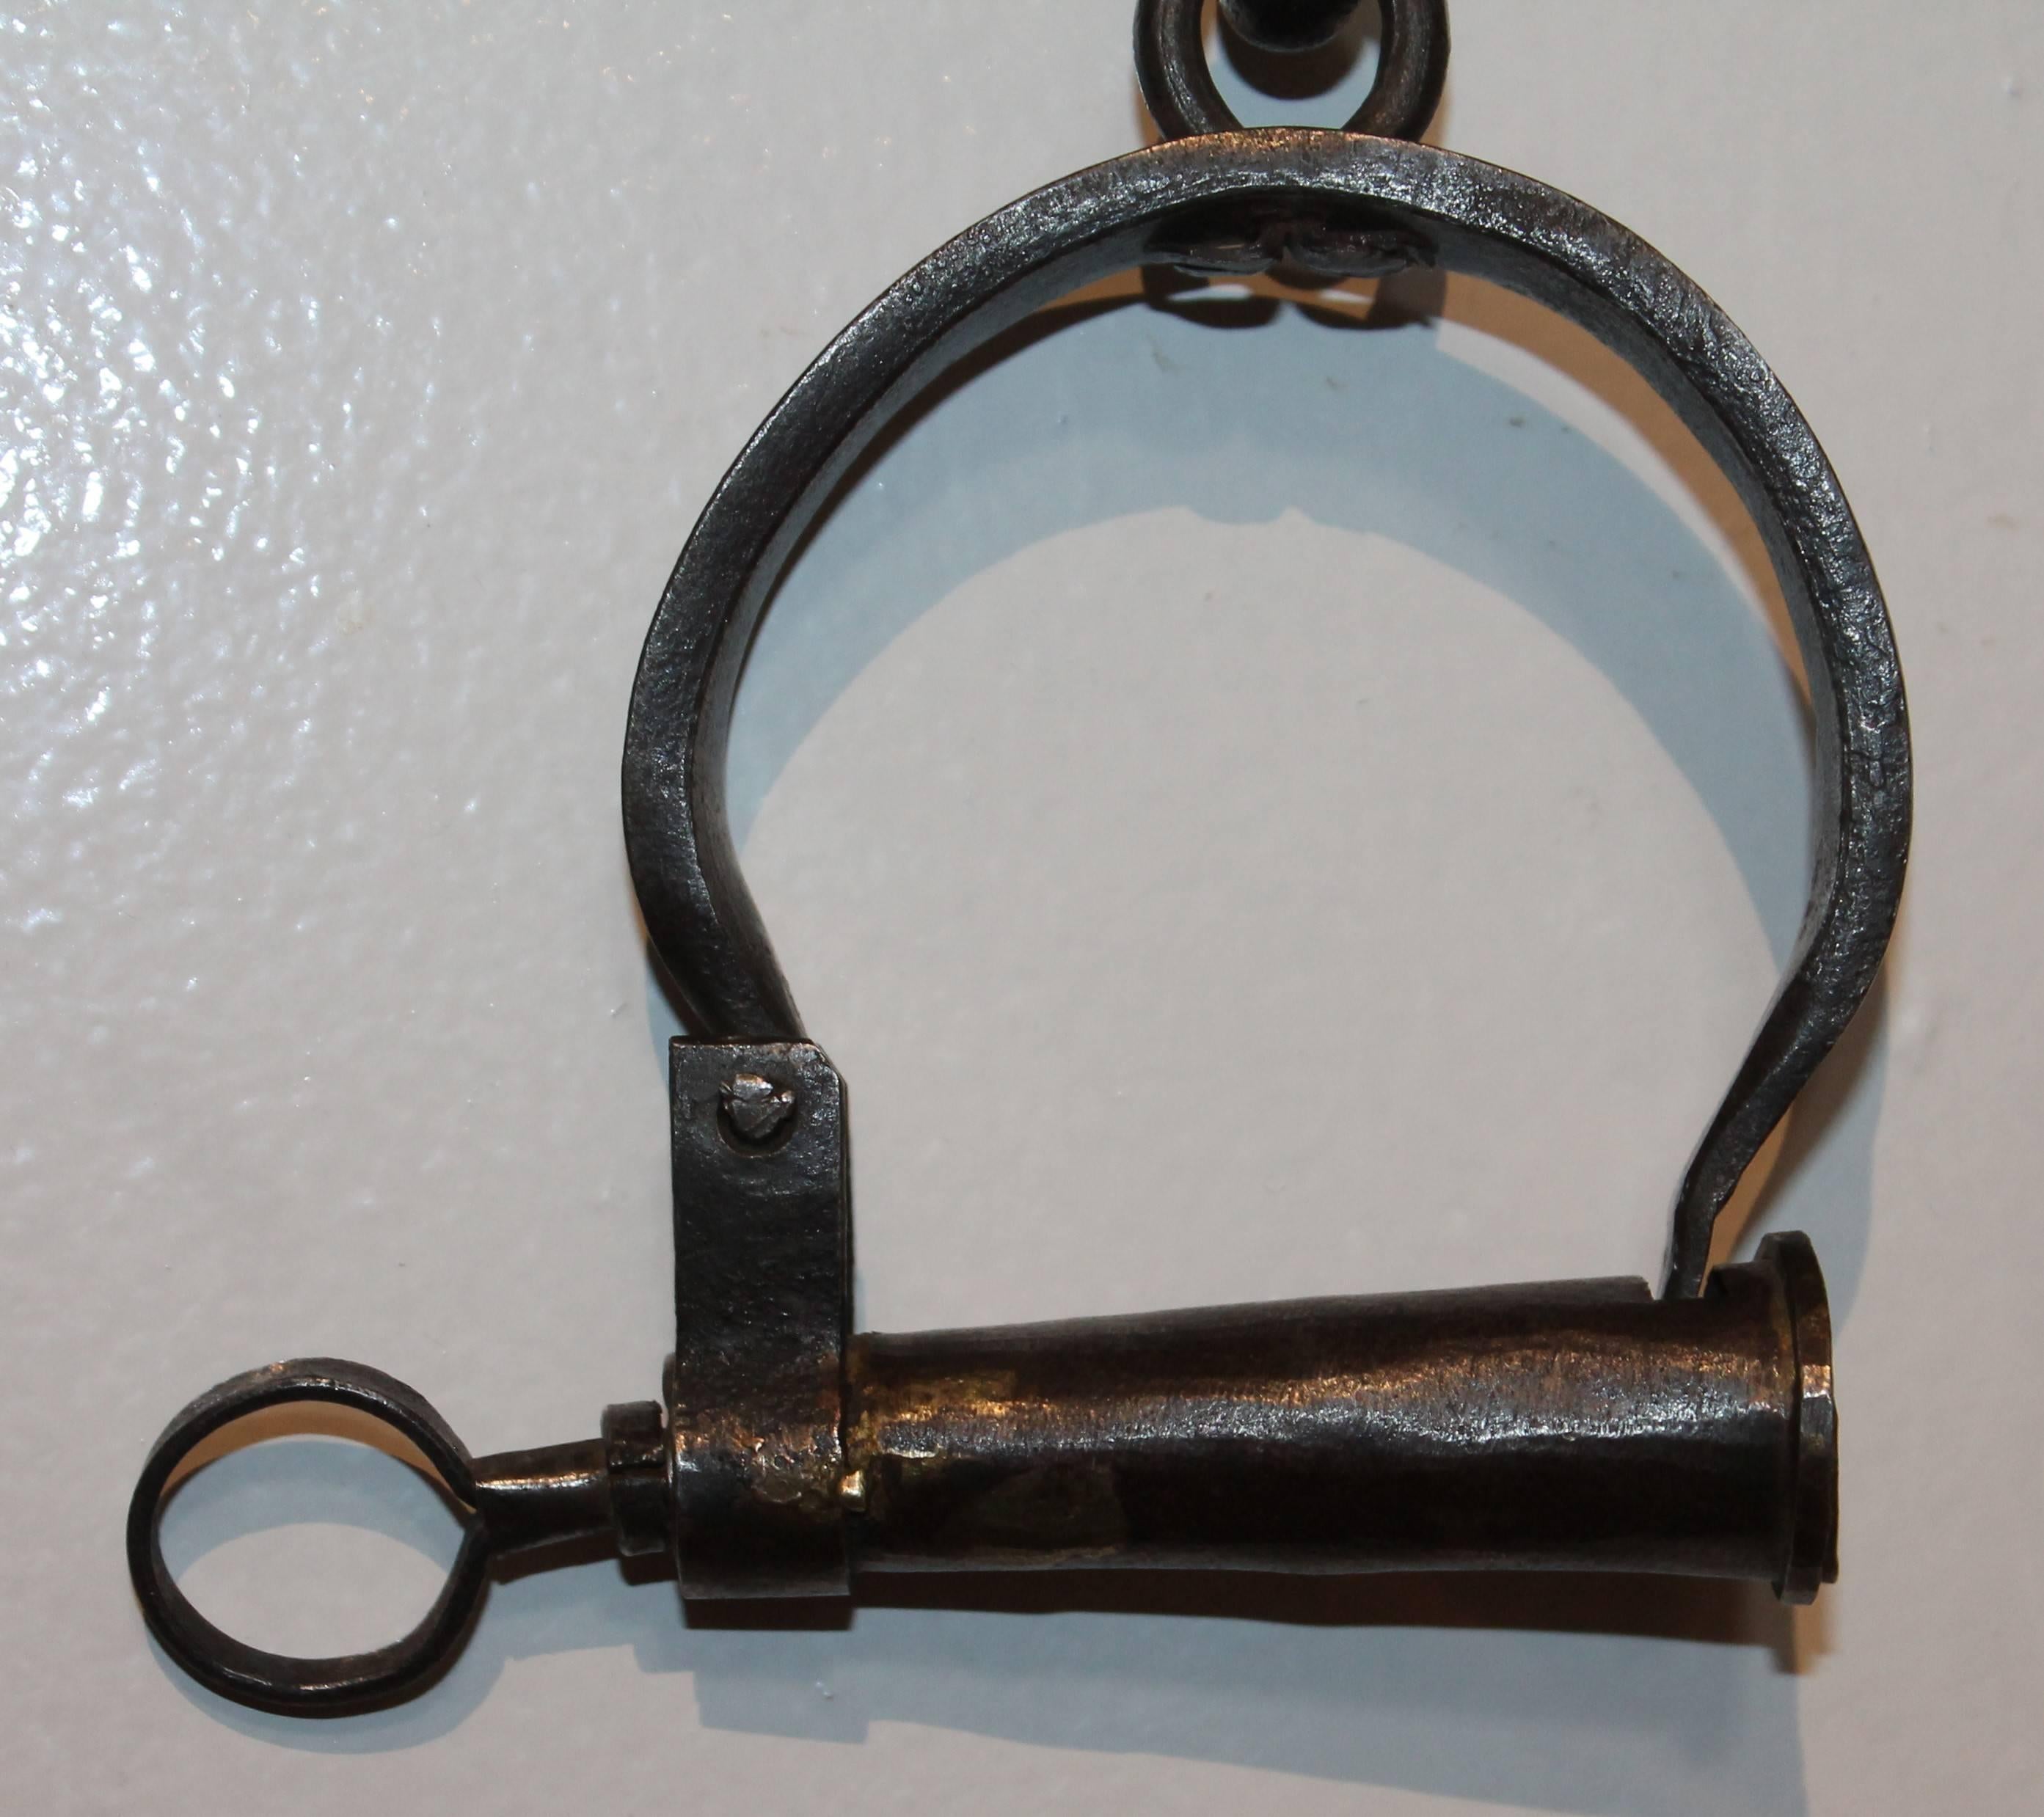 Hand-Crafted Hand Forged Iron 19th Century Hand Cuffs For Sale